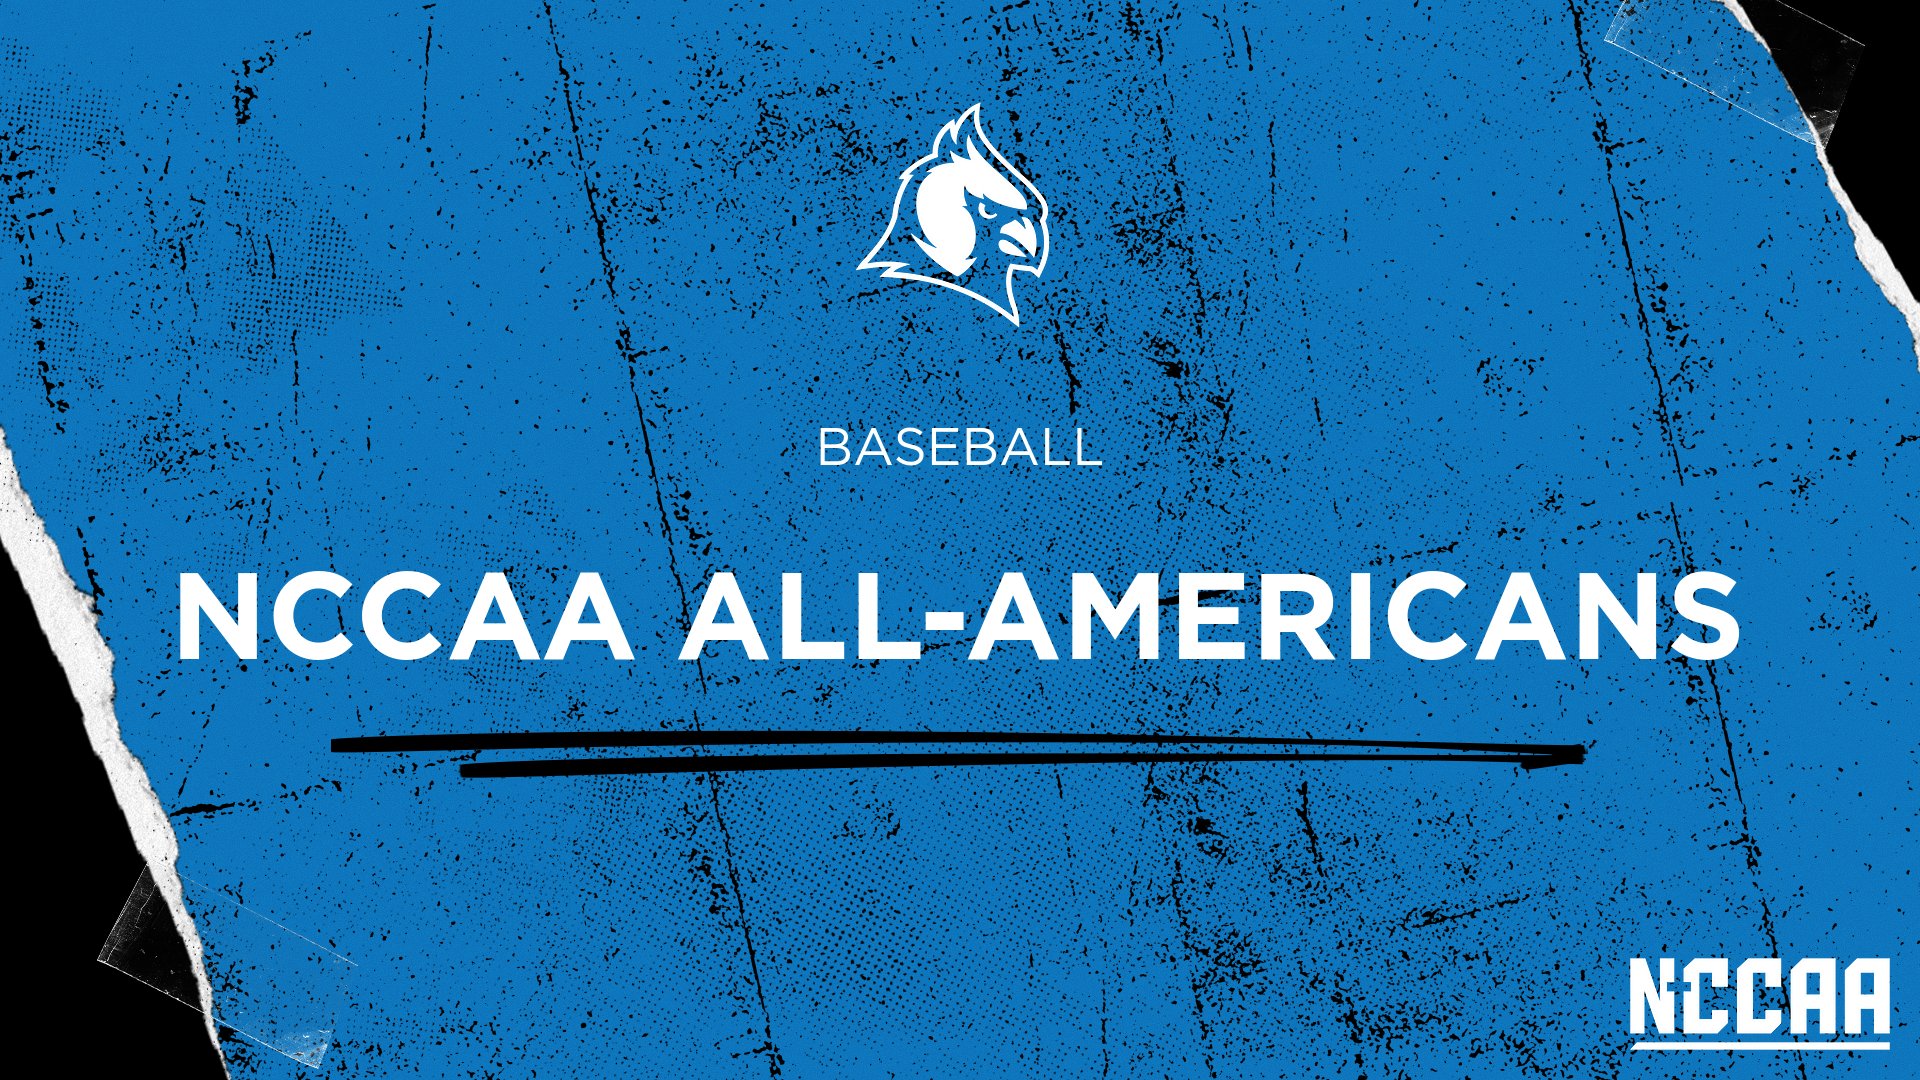 NCCAA ALL-AMERICANS: Several Cardinals earn NCCAA Honors; highlighted by Drew Fleming as Player of the Year